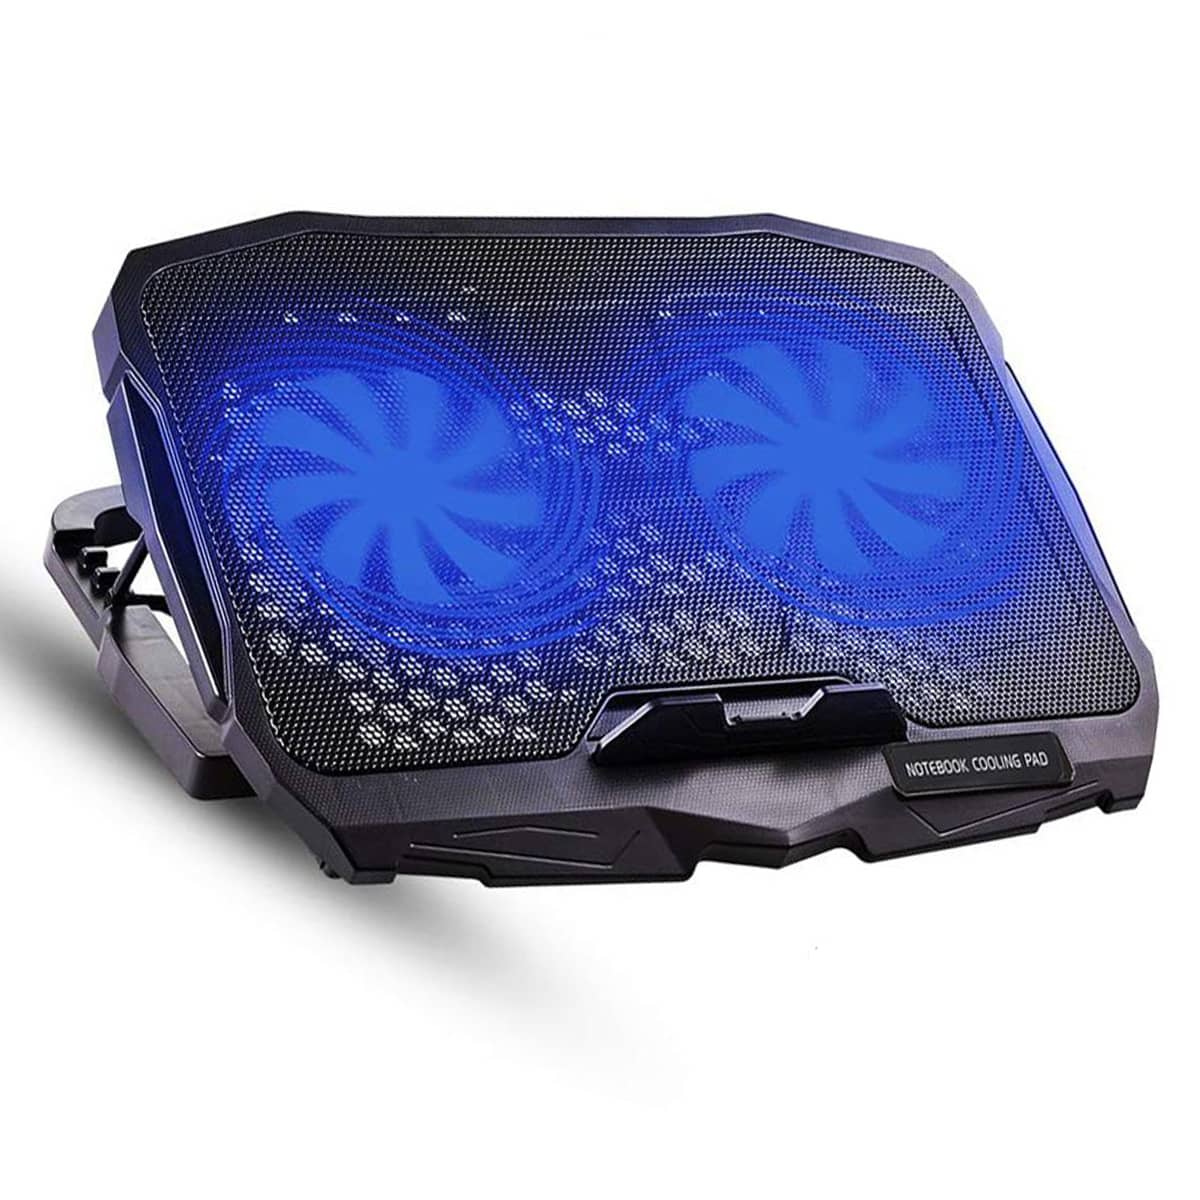 X2 Cooling Pad For 13 17 Inch Laptops Gaming Notebook 2 large Fans 1